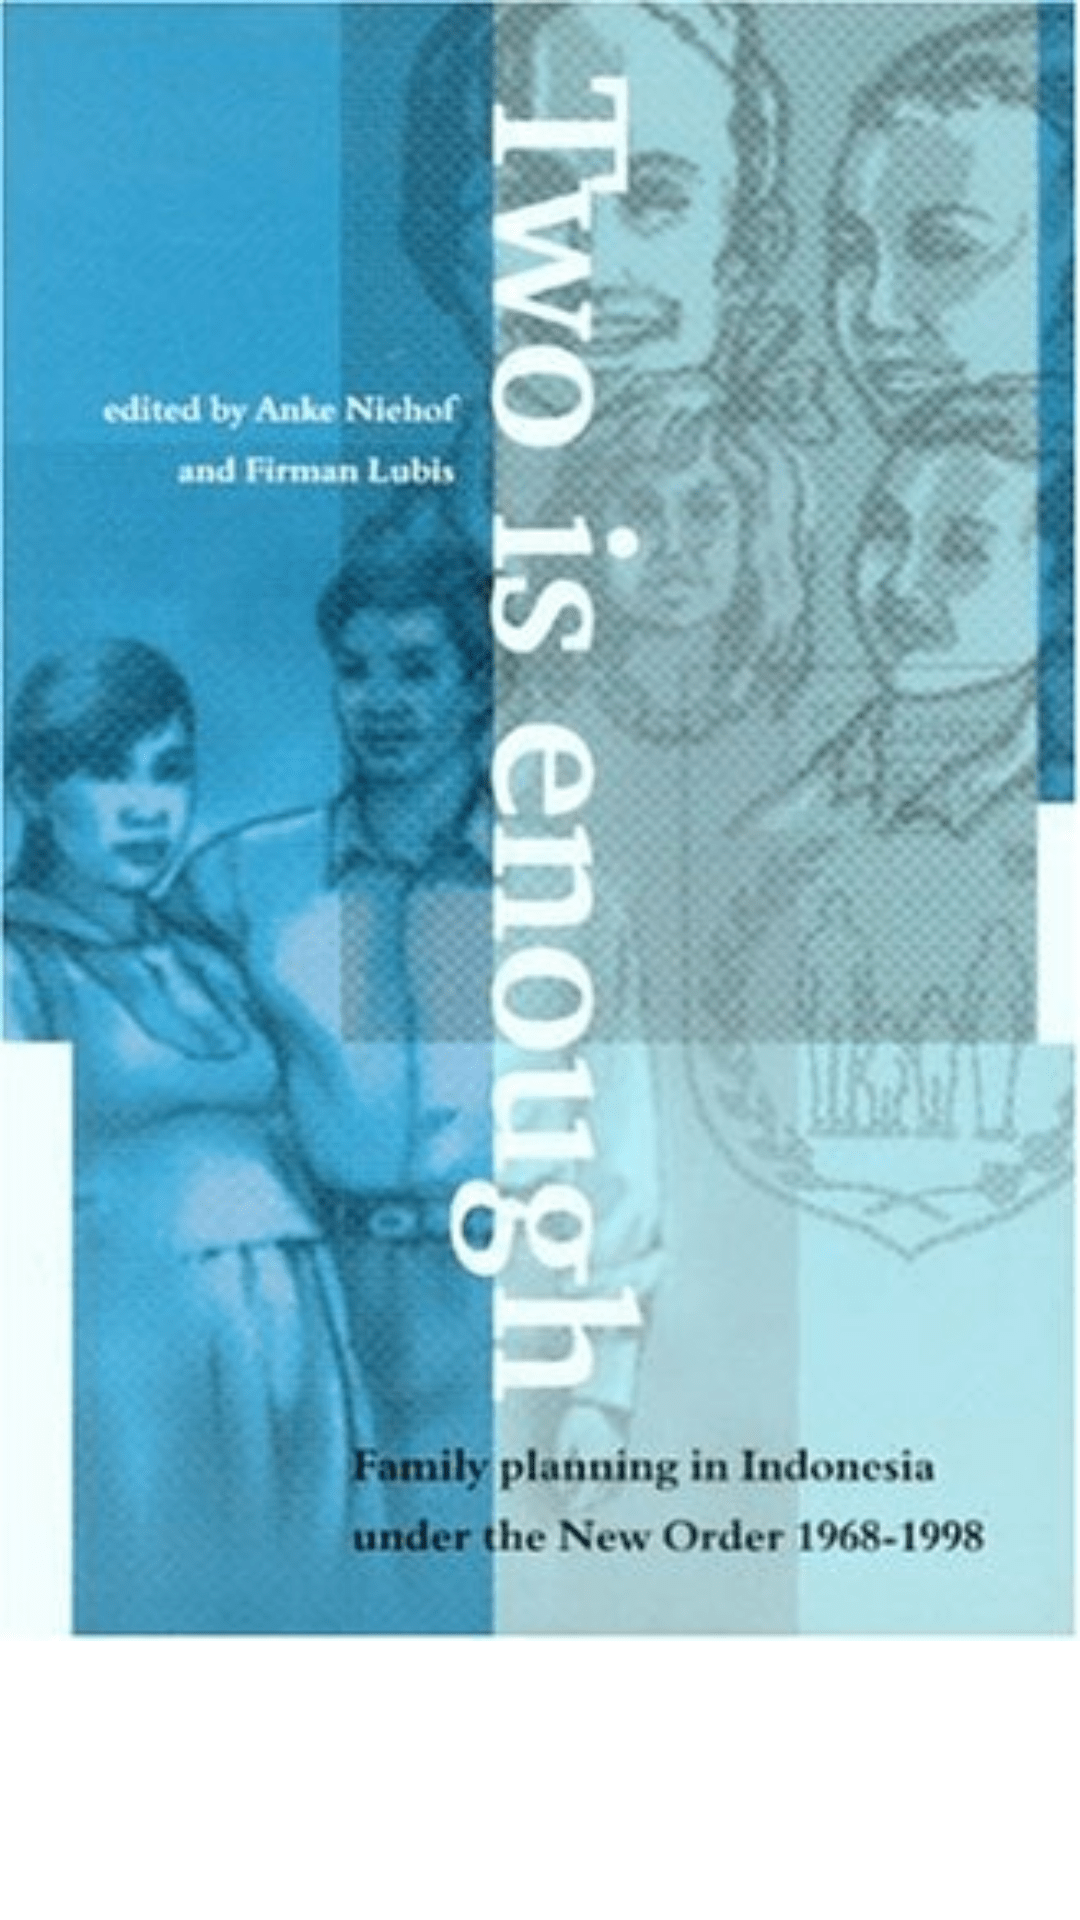 Two is Enough: Family Planning in Indonesia Under the New Order 1968-1998